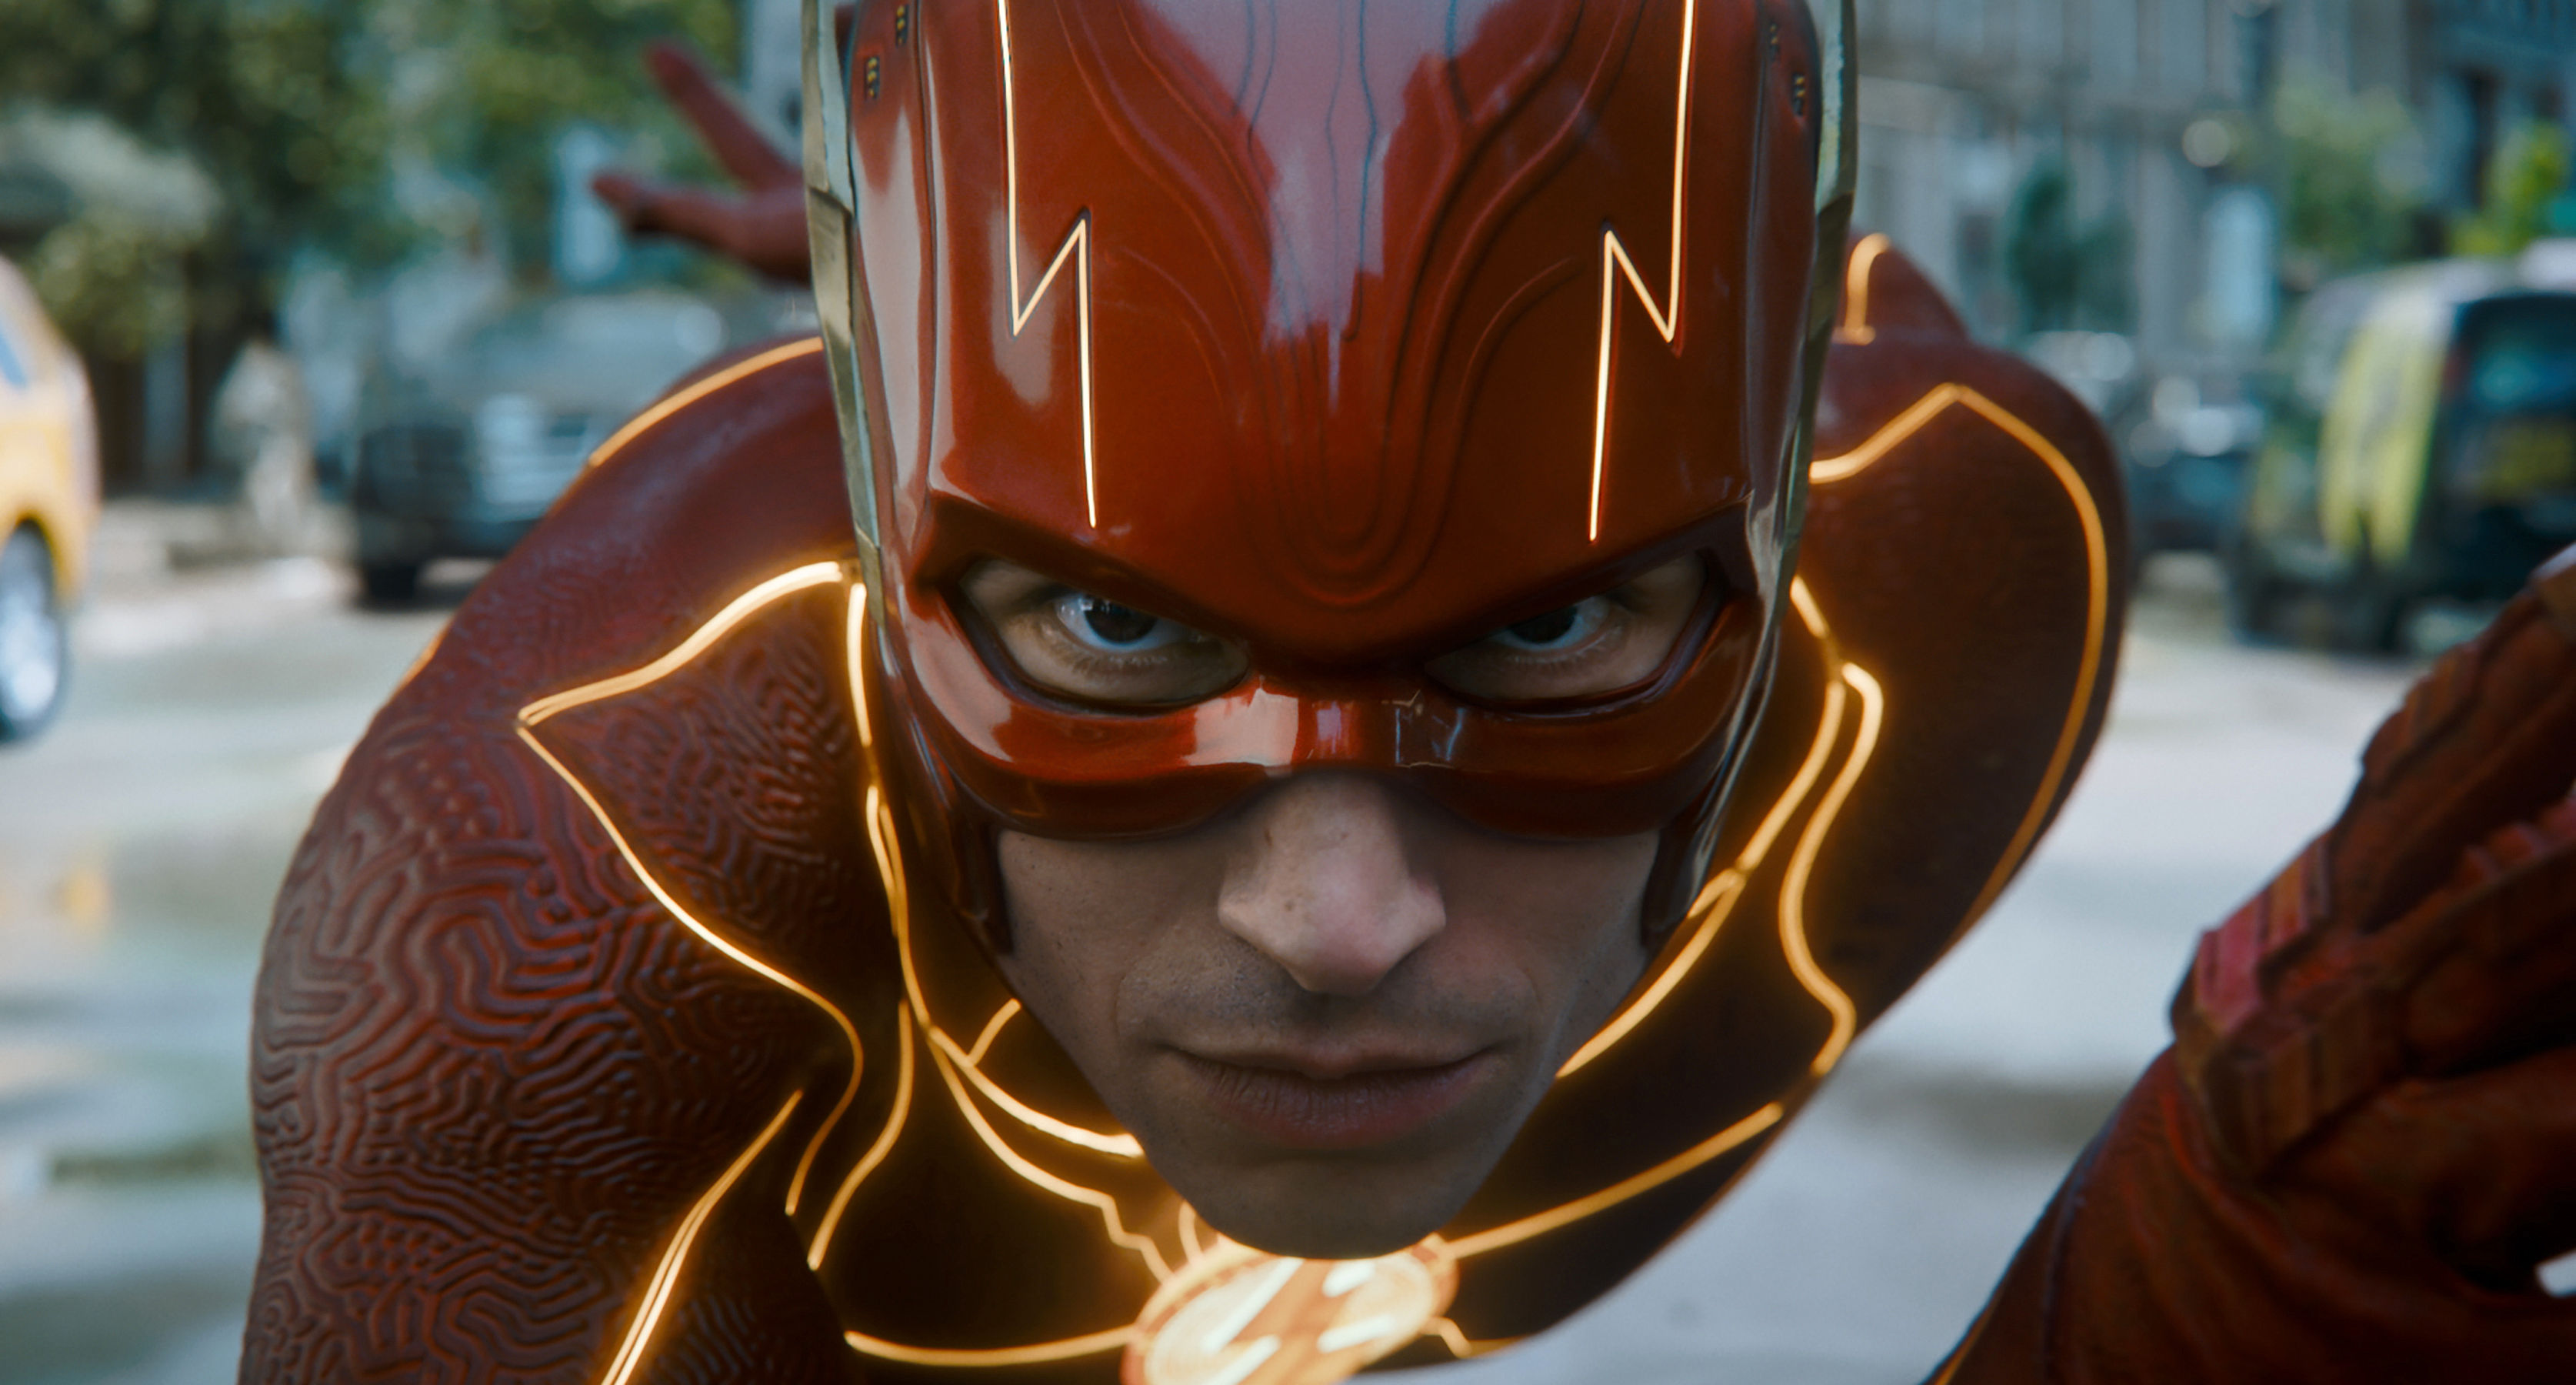 The Flash strikes a running pose in a still from the film The Flash